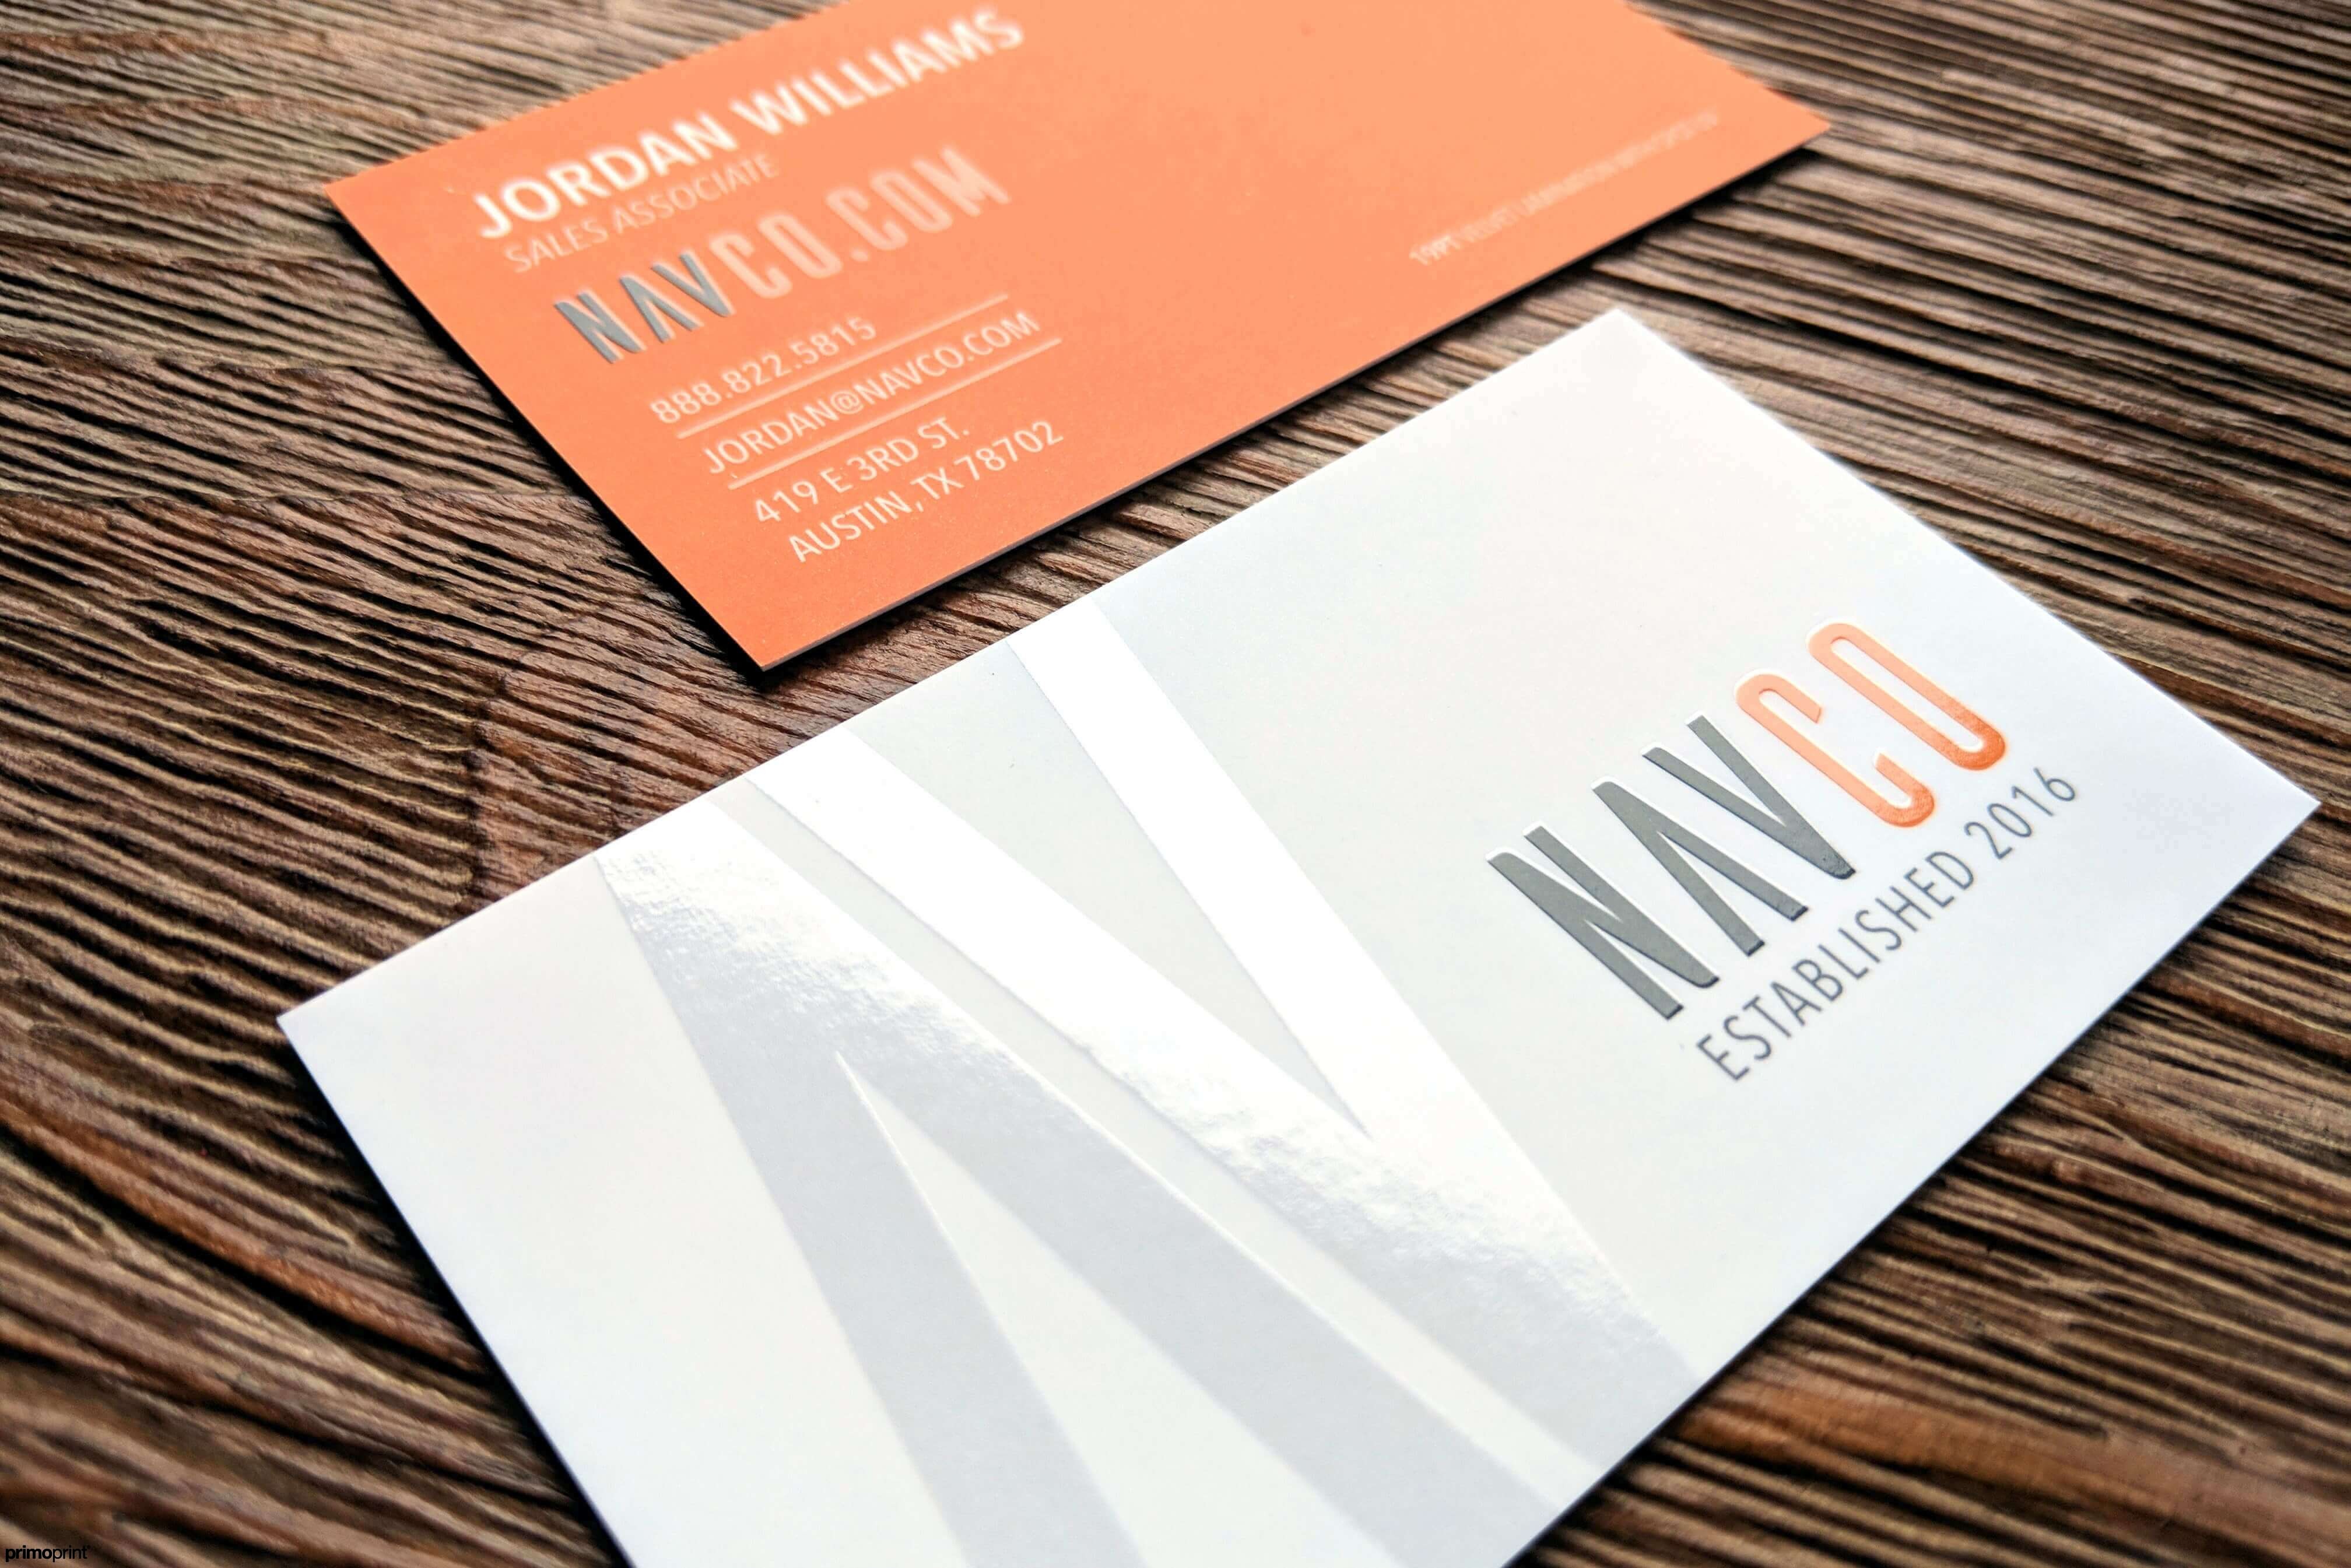 Enhance your velvet laminated business card by adding Spot UV! Highlight an image, logo or pattern for some extra pizzaz.